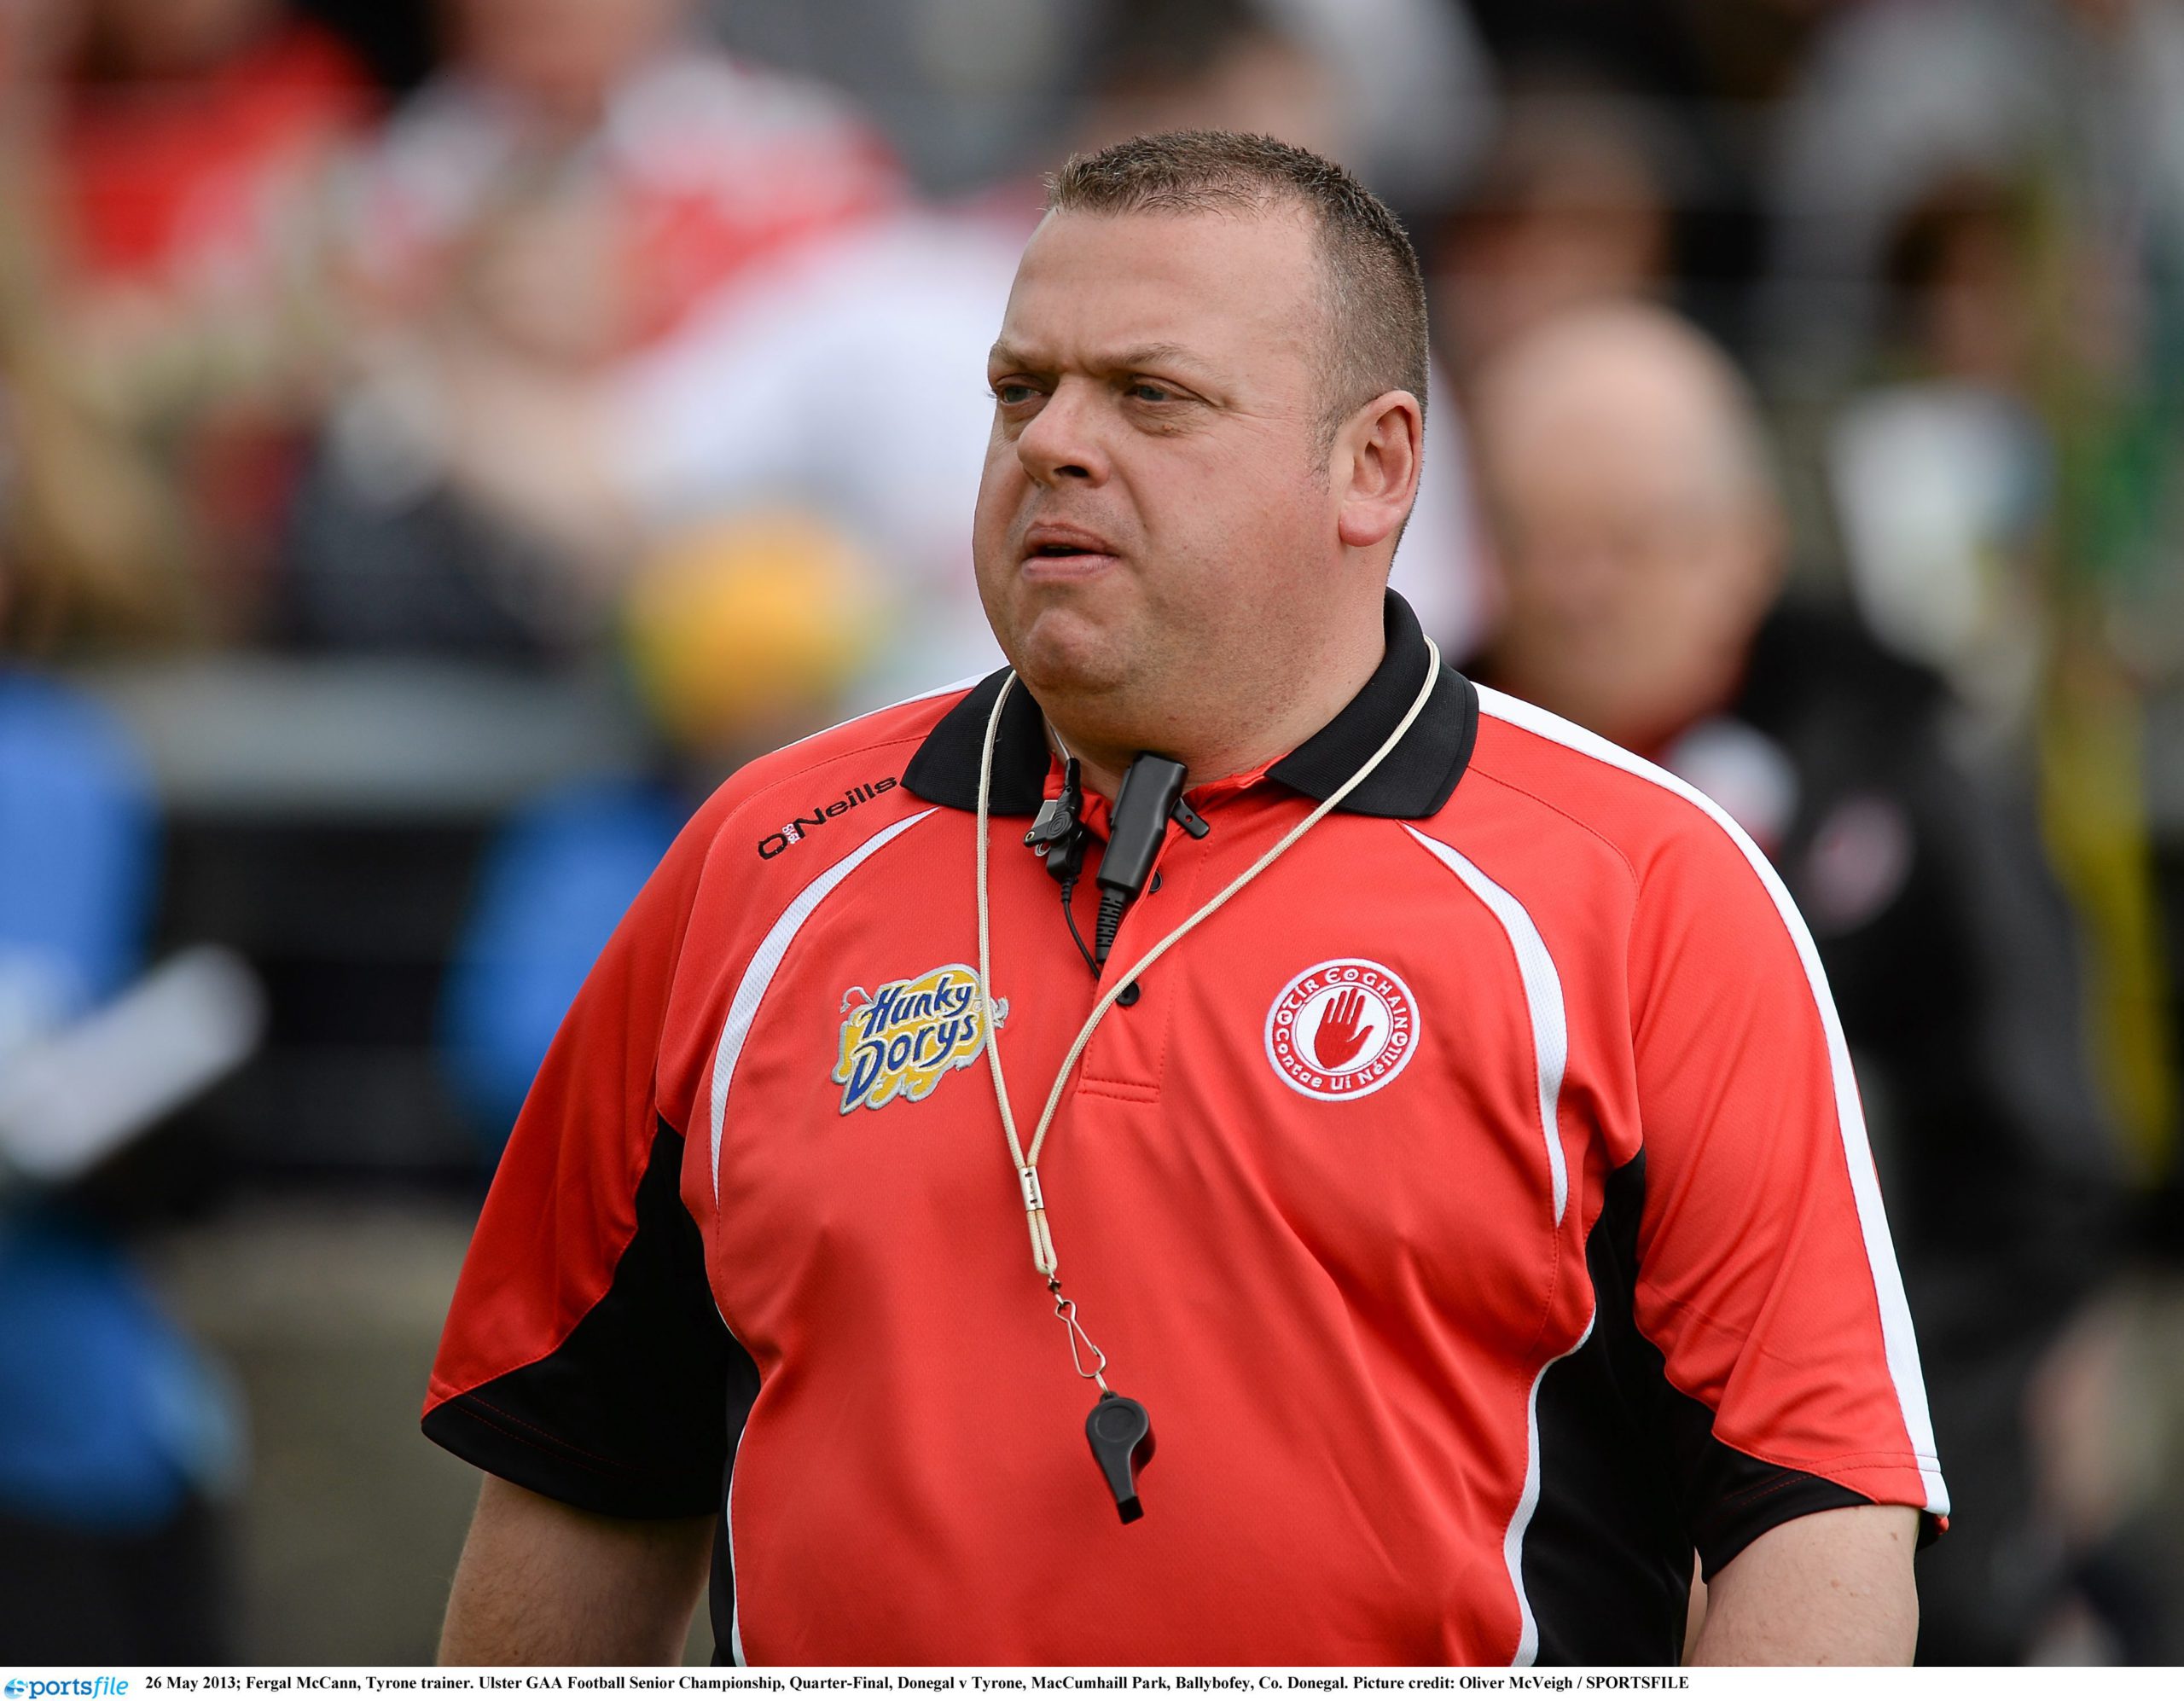 Funeral of Tyrone All-Ireland winning coach takes place